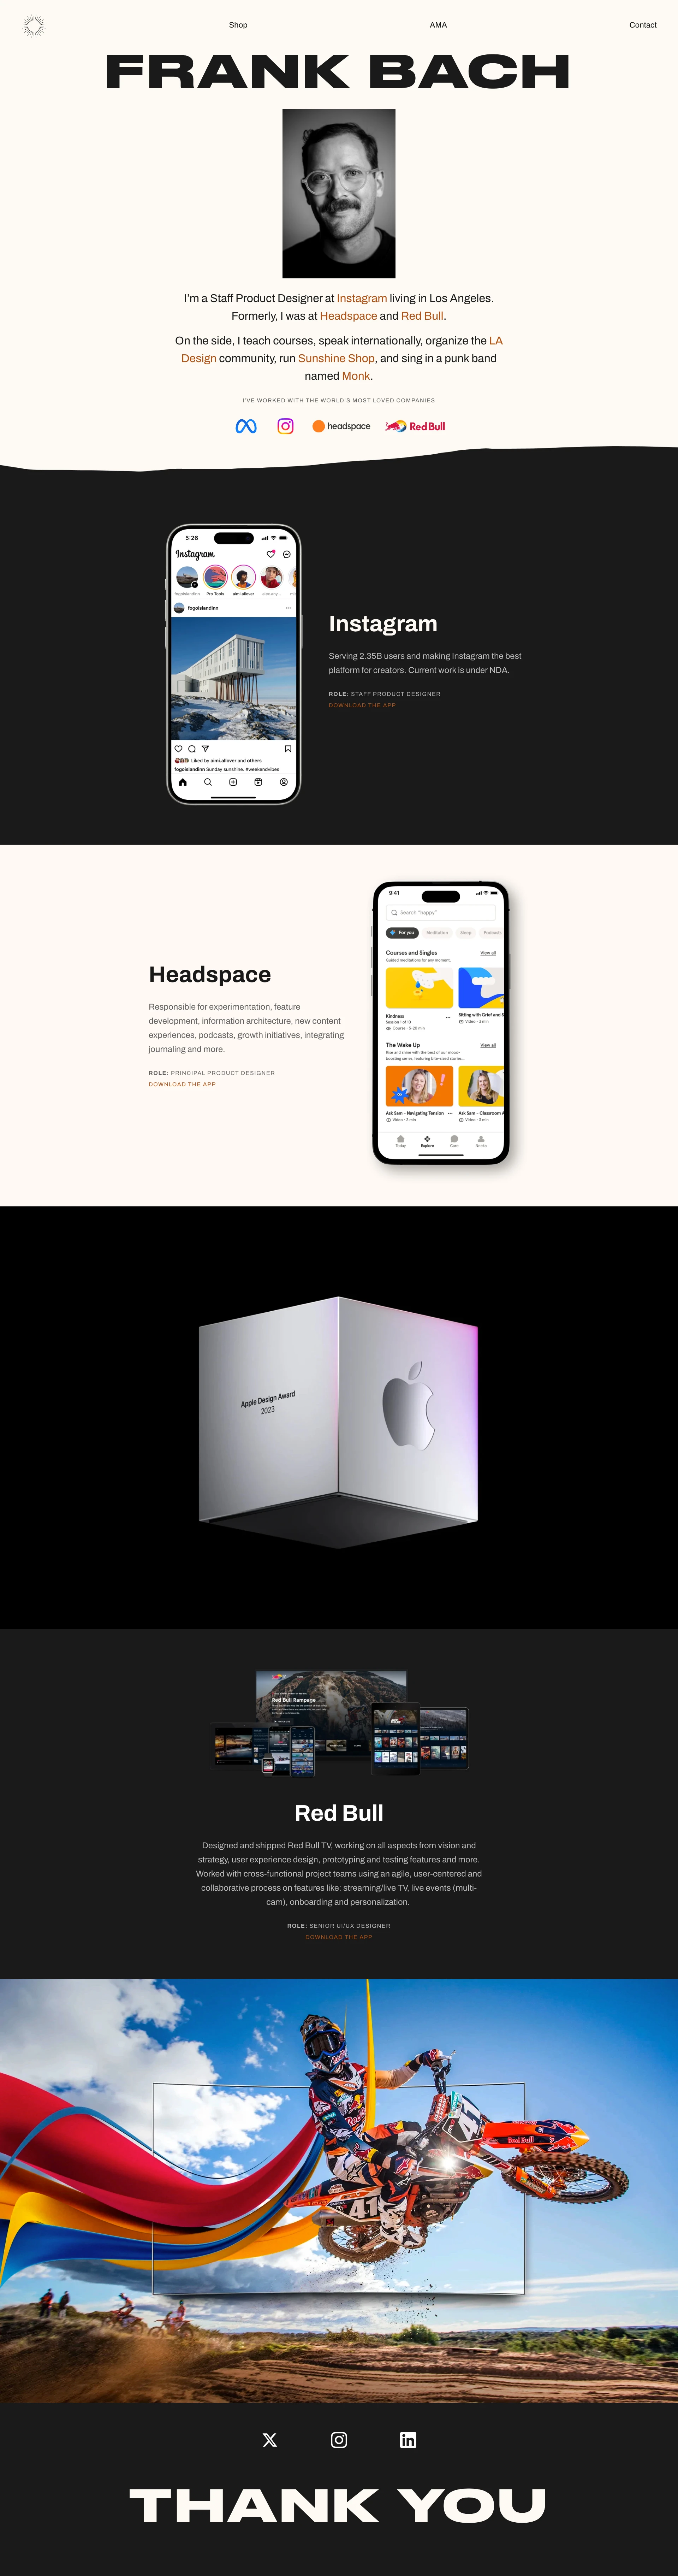 Frank Bach Landing Page Example: I’m a Staff Product Designer at Instagram living in Los Angeles. Formerly, I was at Headspace and Red Bull. On the side, I teach courses, speak internationally, organize the LA Design community, run Sunshine Shop, and sing in a punk band named Monk.